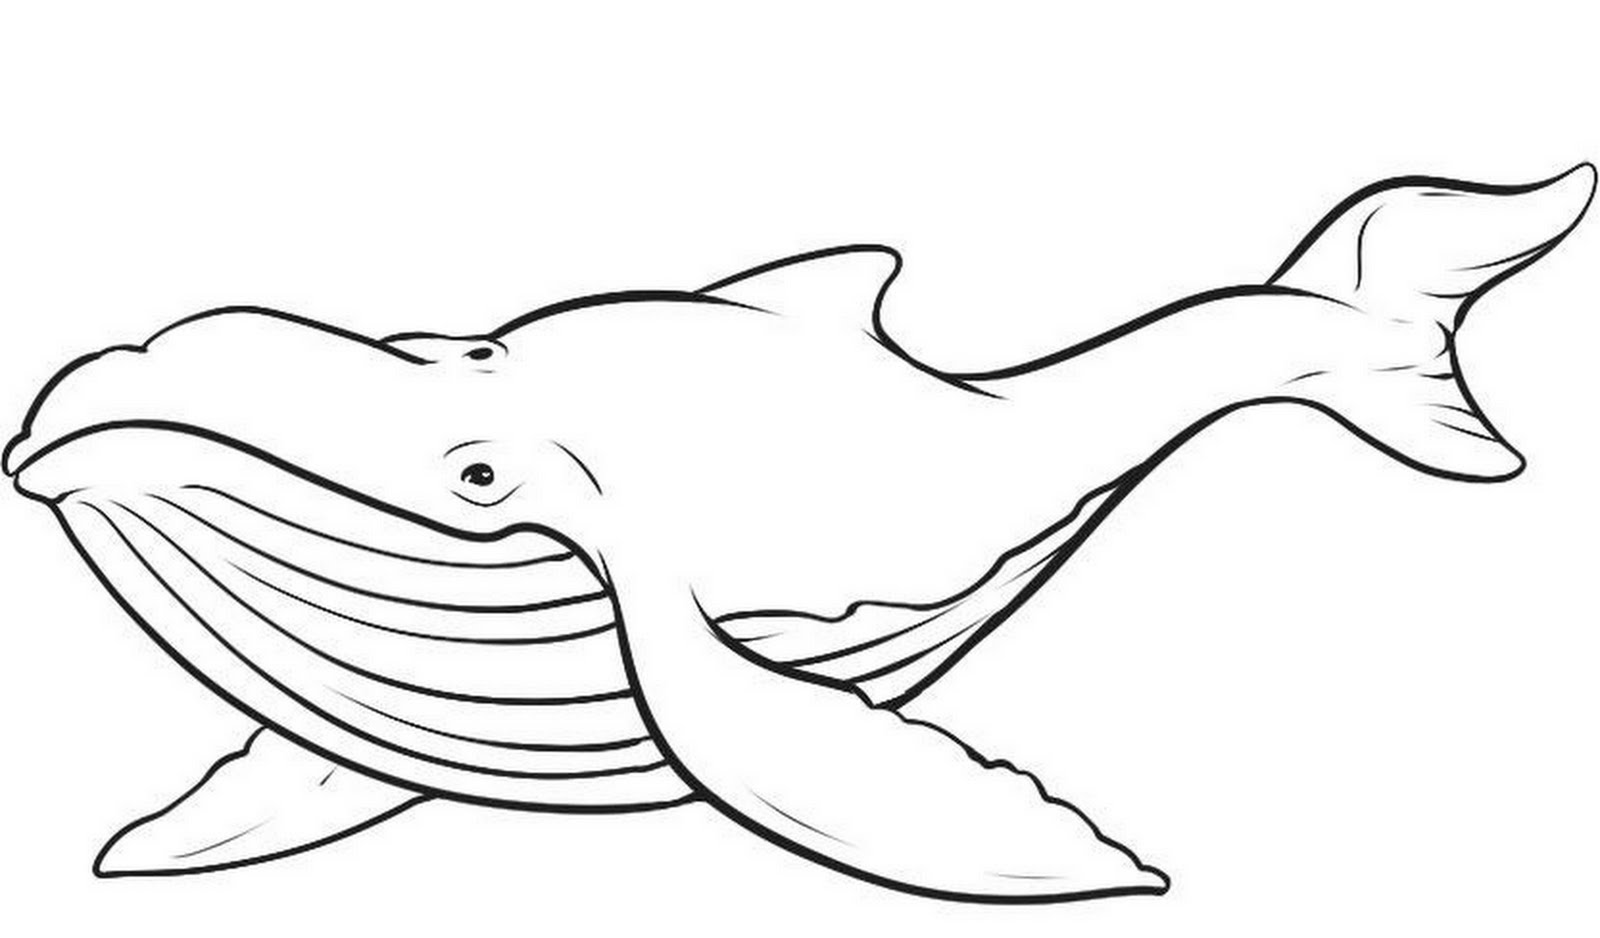 Whale coloring pages to download and print for free